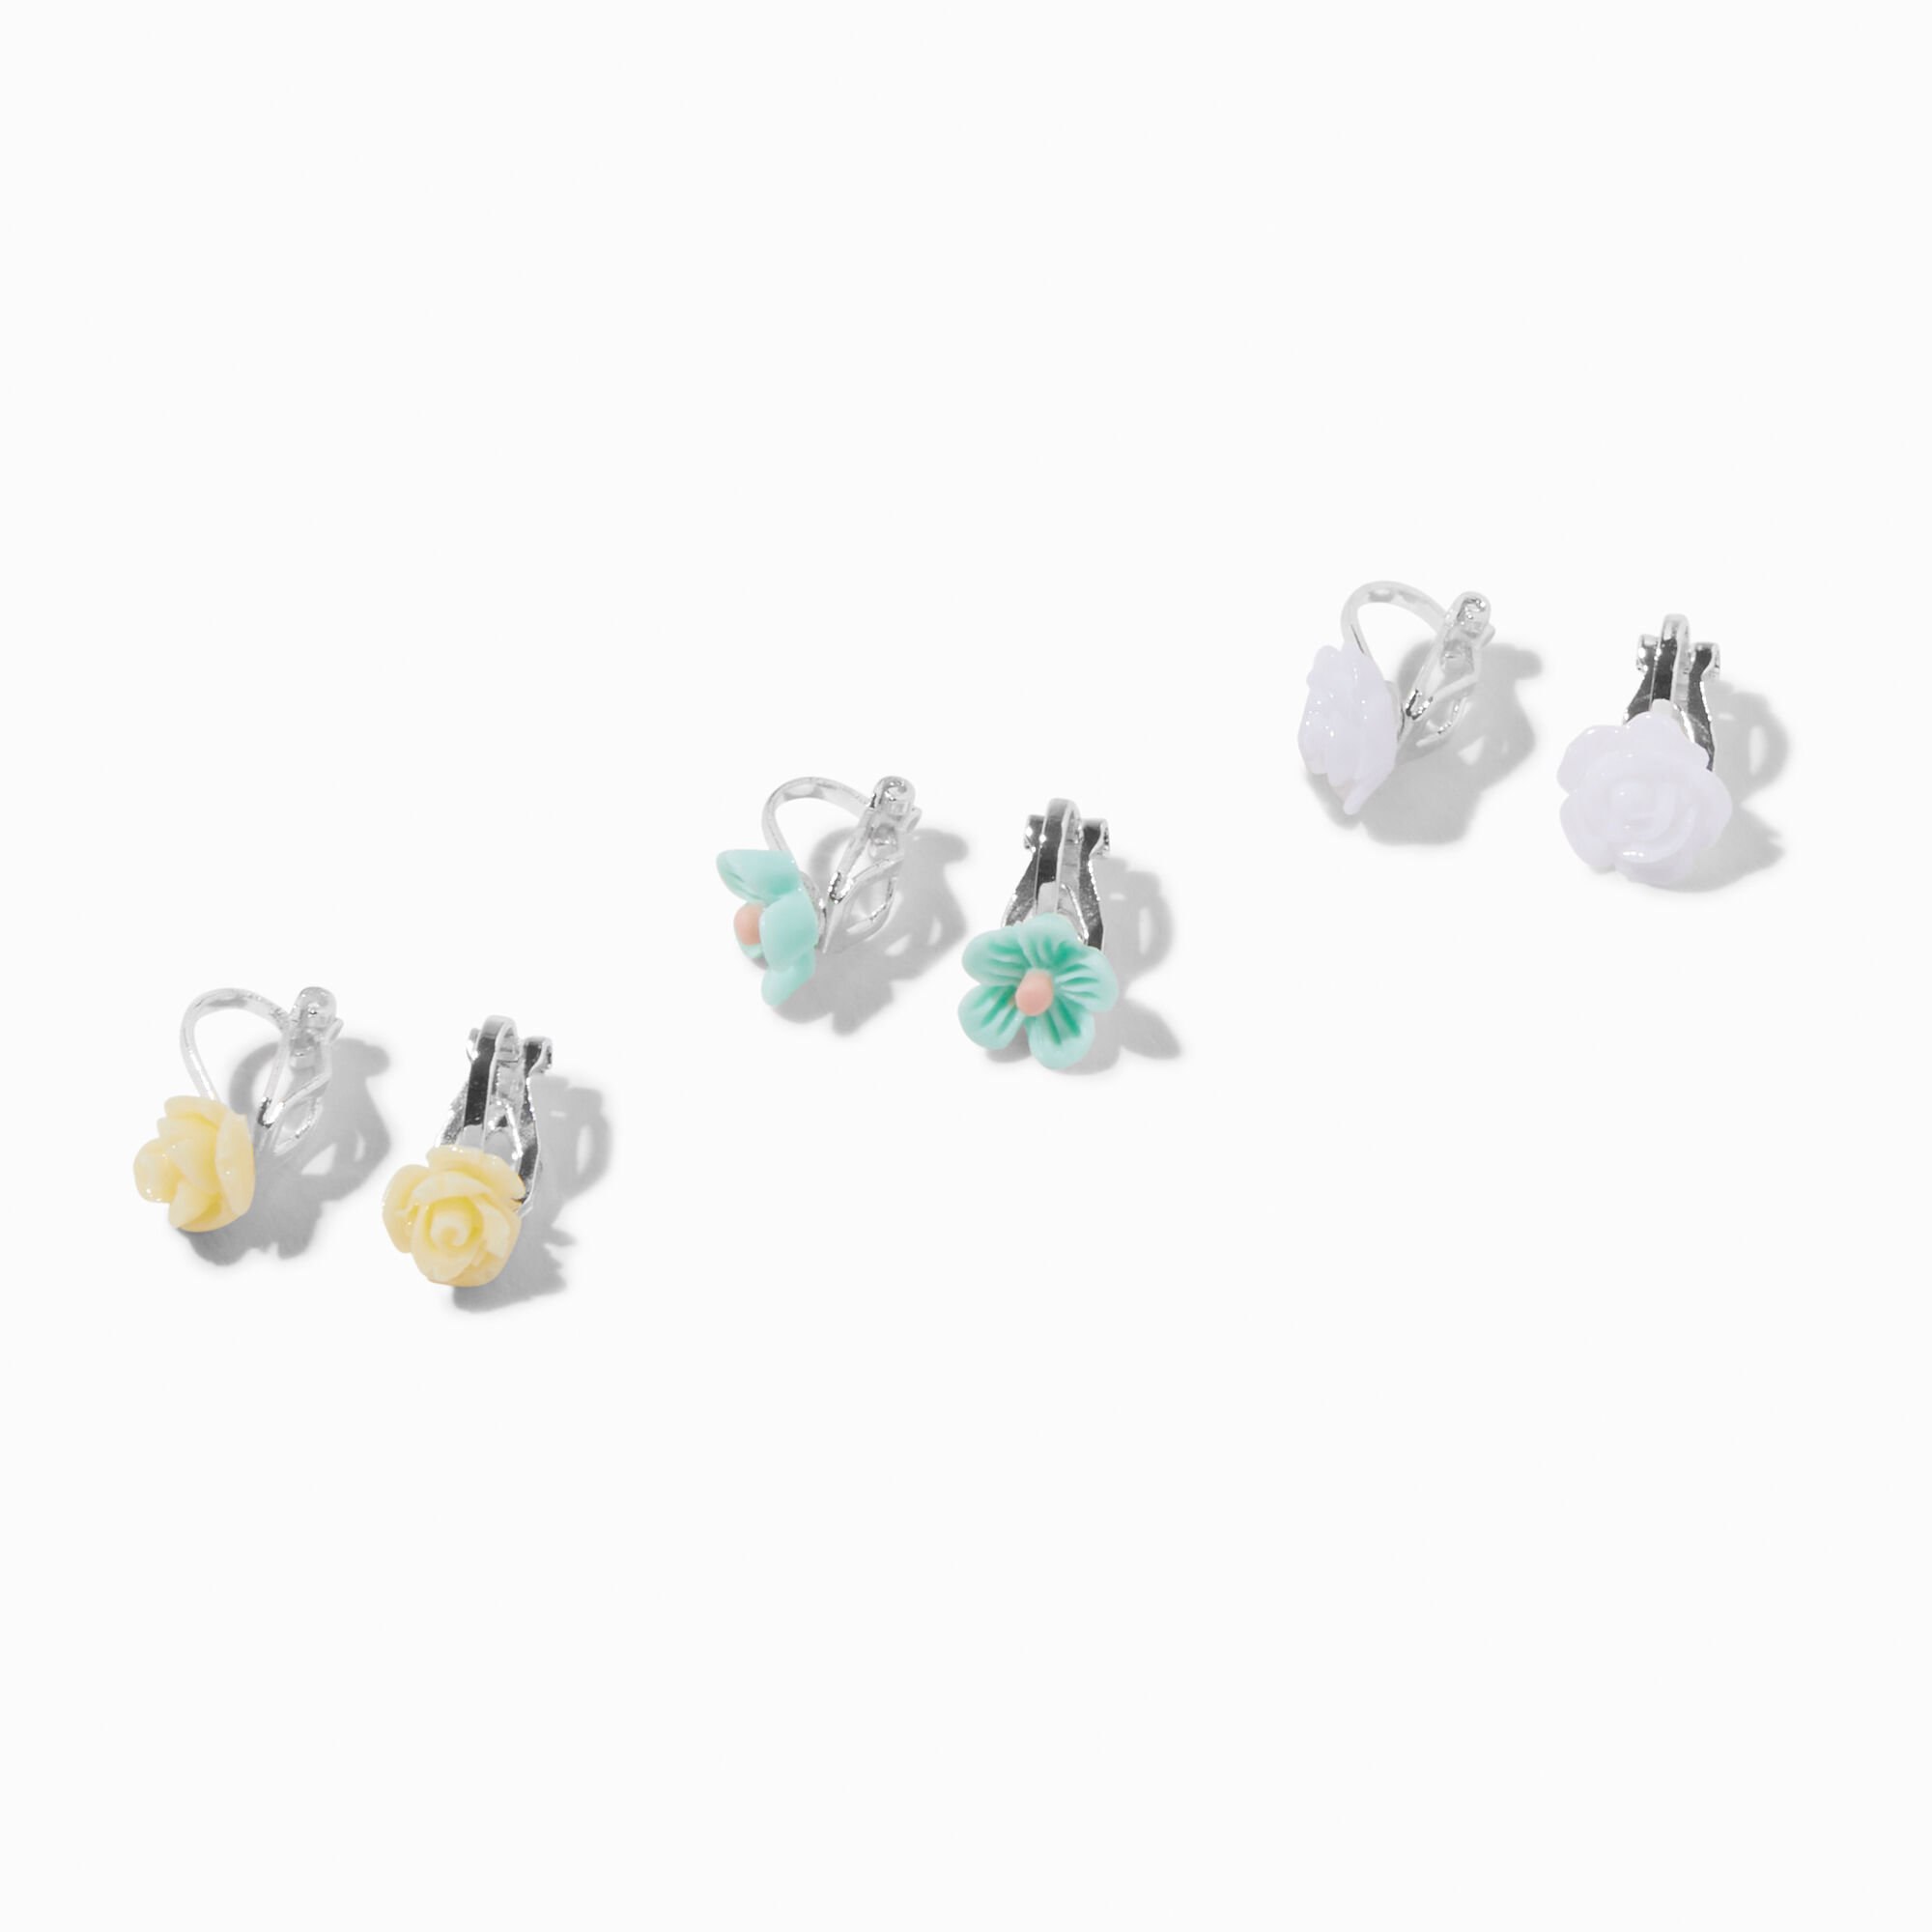 View Claires Pastel Floral ClipOn Earrings 3 Pack Silver information